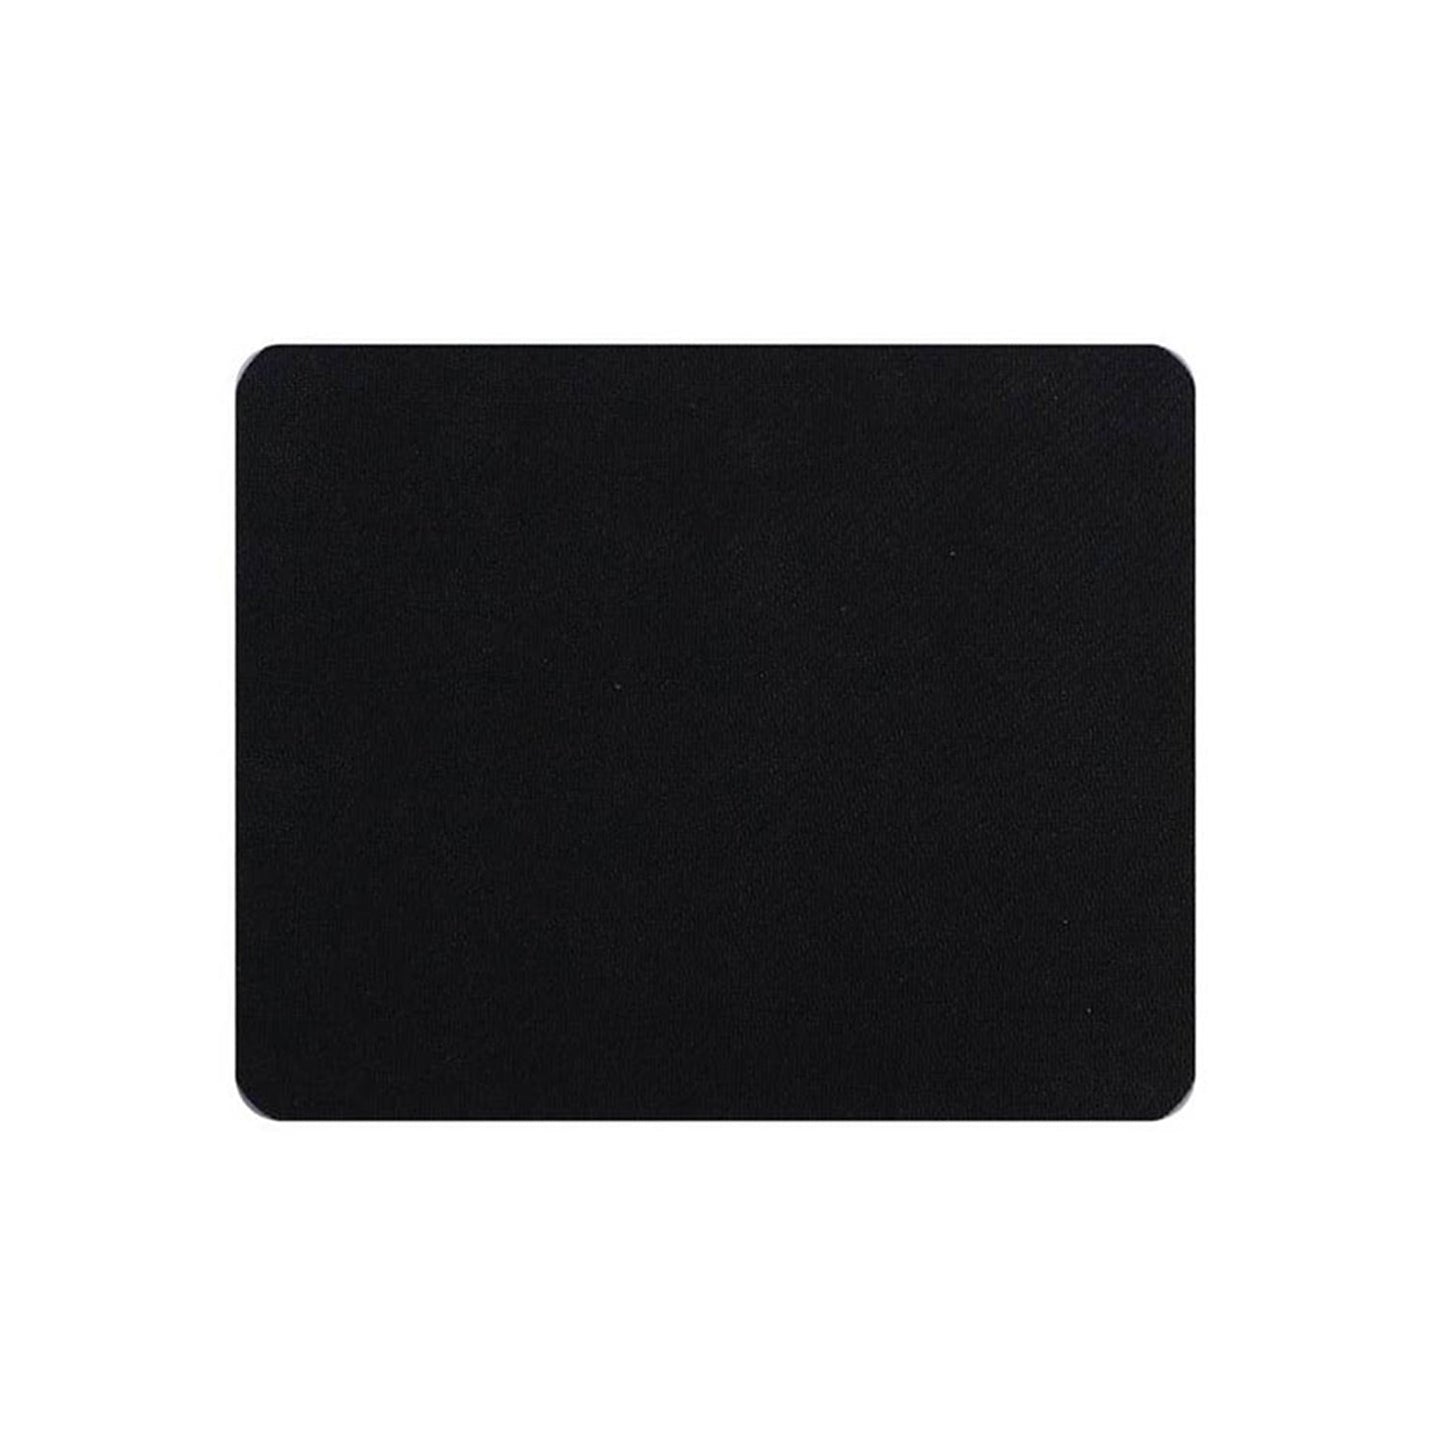 6162 Simple Mouse Pad Used For Mouse While Using Computer.